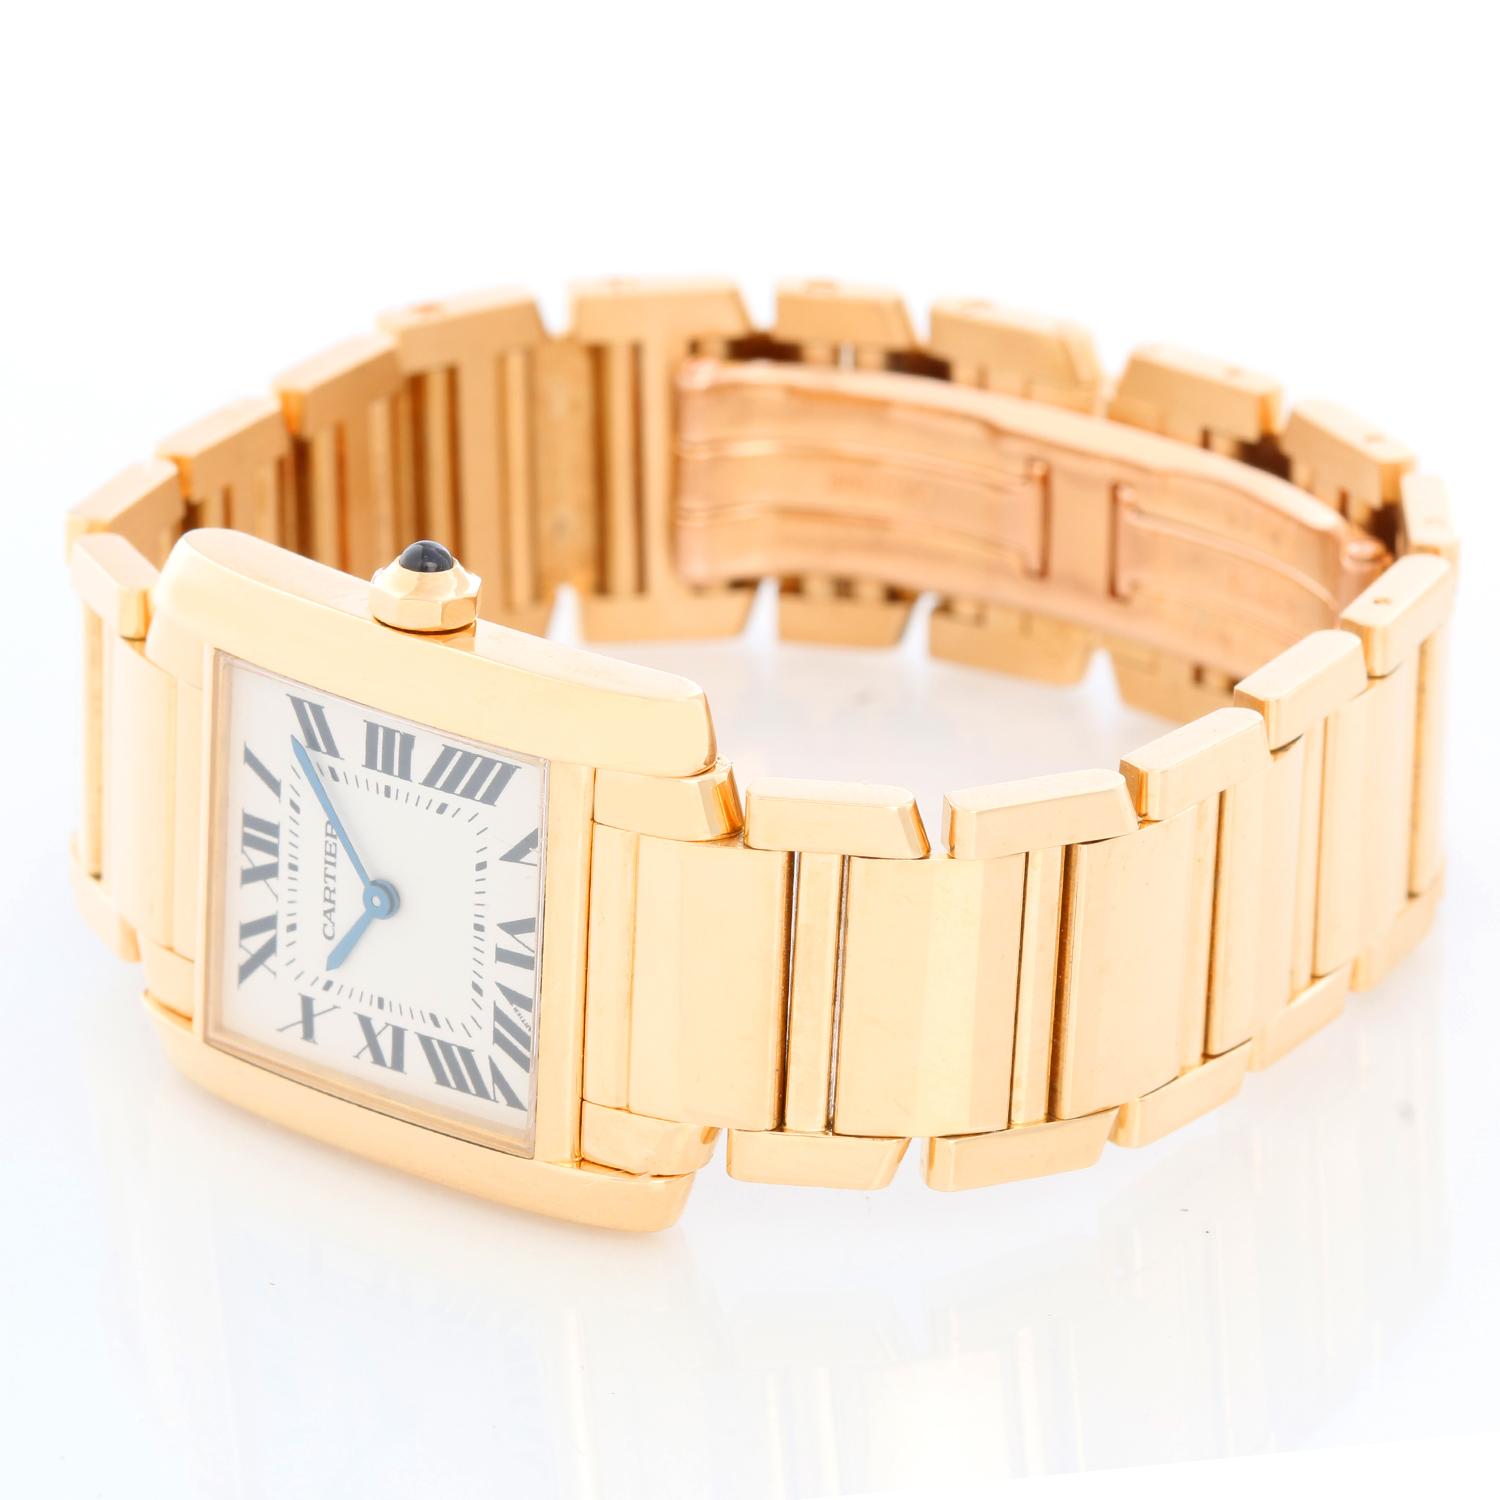 Cartier Tank Francaise Midsize 18k Yellow Gold Watch W50003N2 1821 - Quartz. 18k yellow gold  case; blue sapphire cabochon crown (25mm x 30mm). Ivory colored dial with black Roman numerals. Cartier 18k yellow gold bracelet. Pre-owned with Cartier